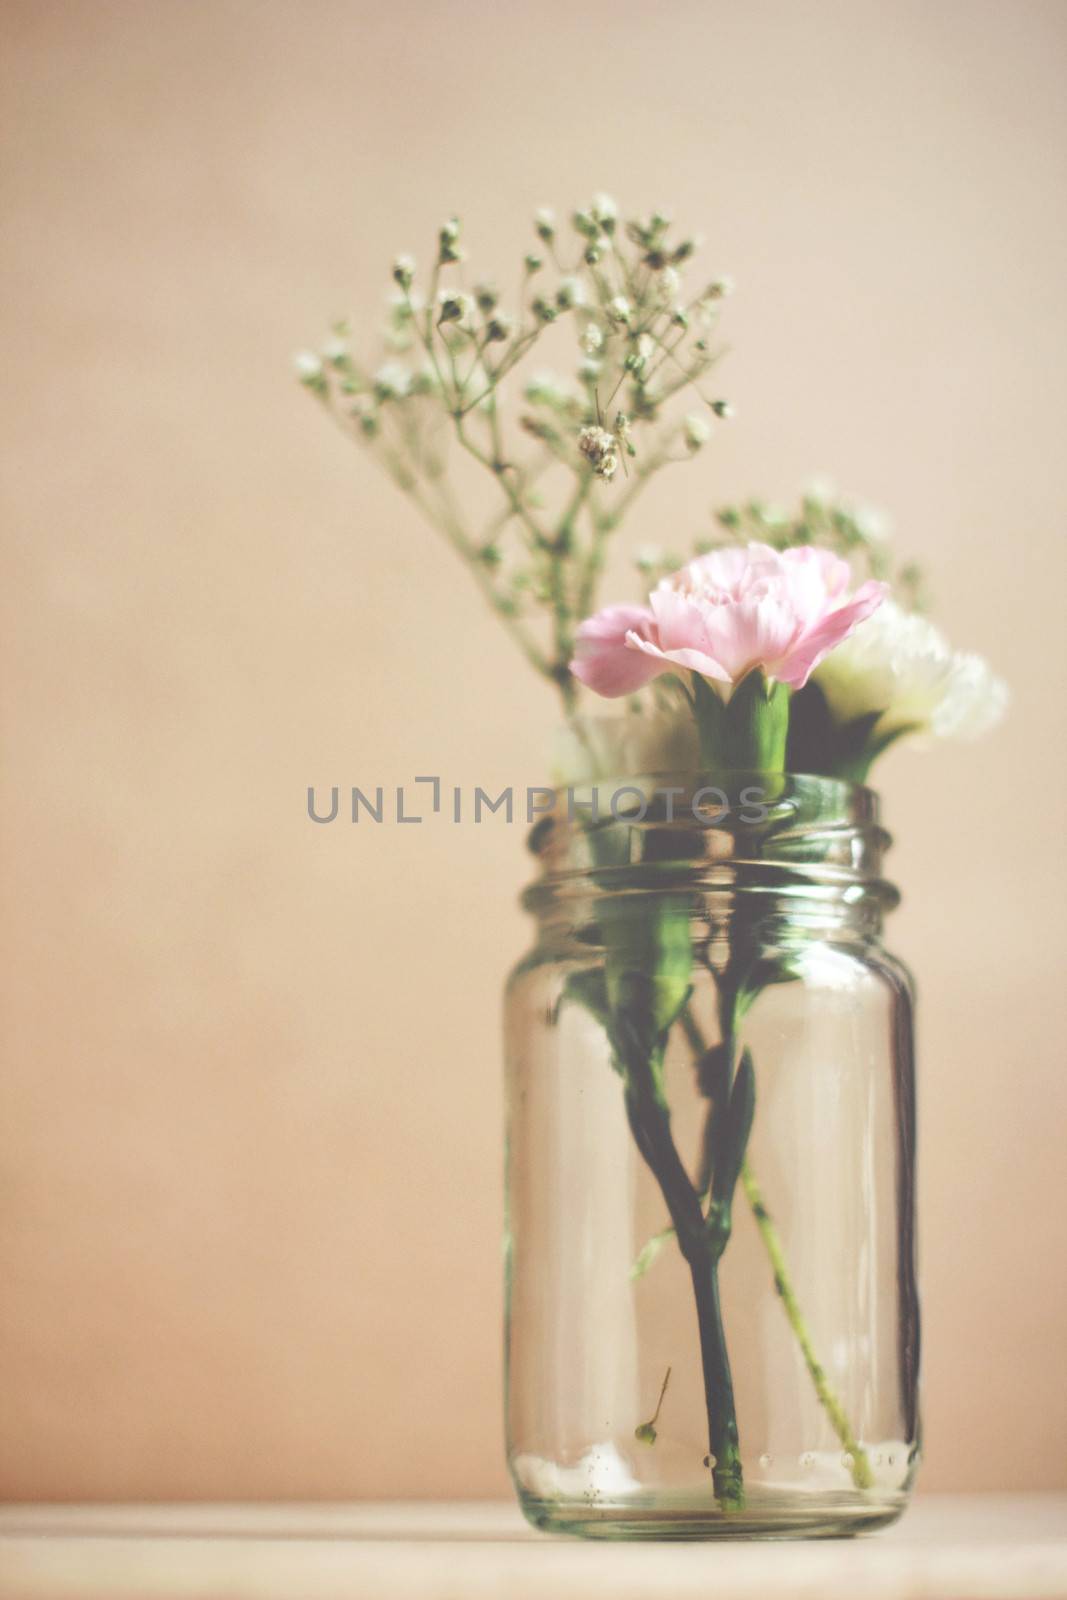 Ornamental flower in glass of jar with retro filter effect by nuchylee